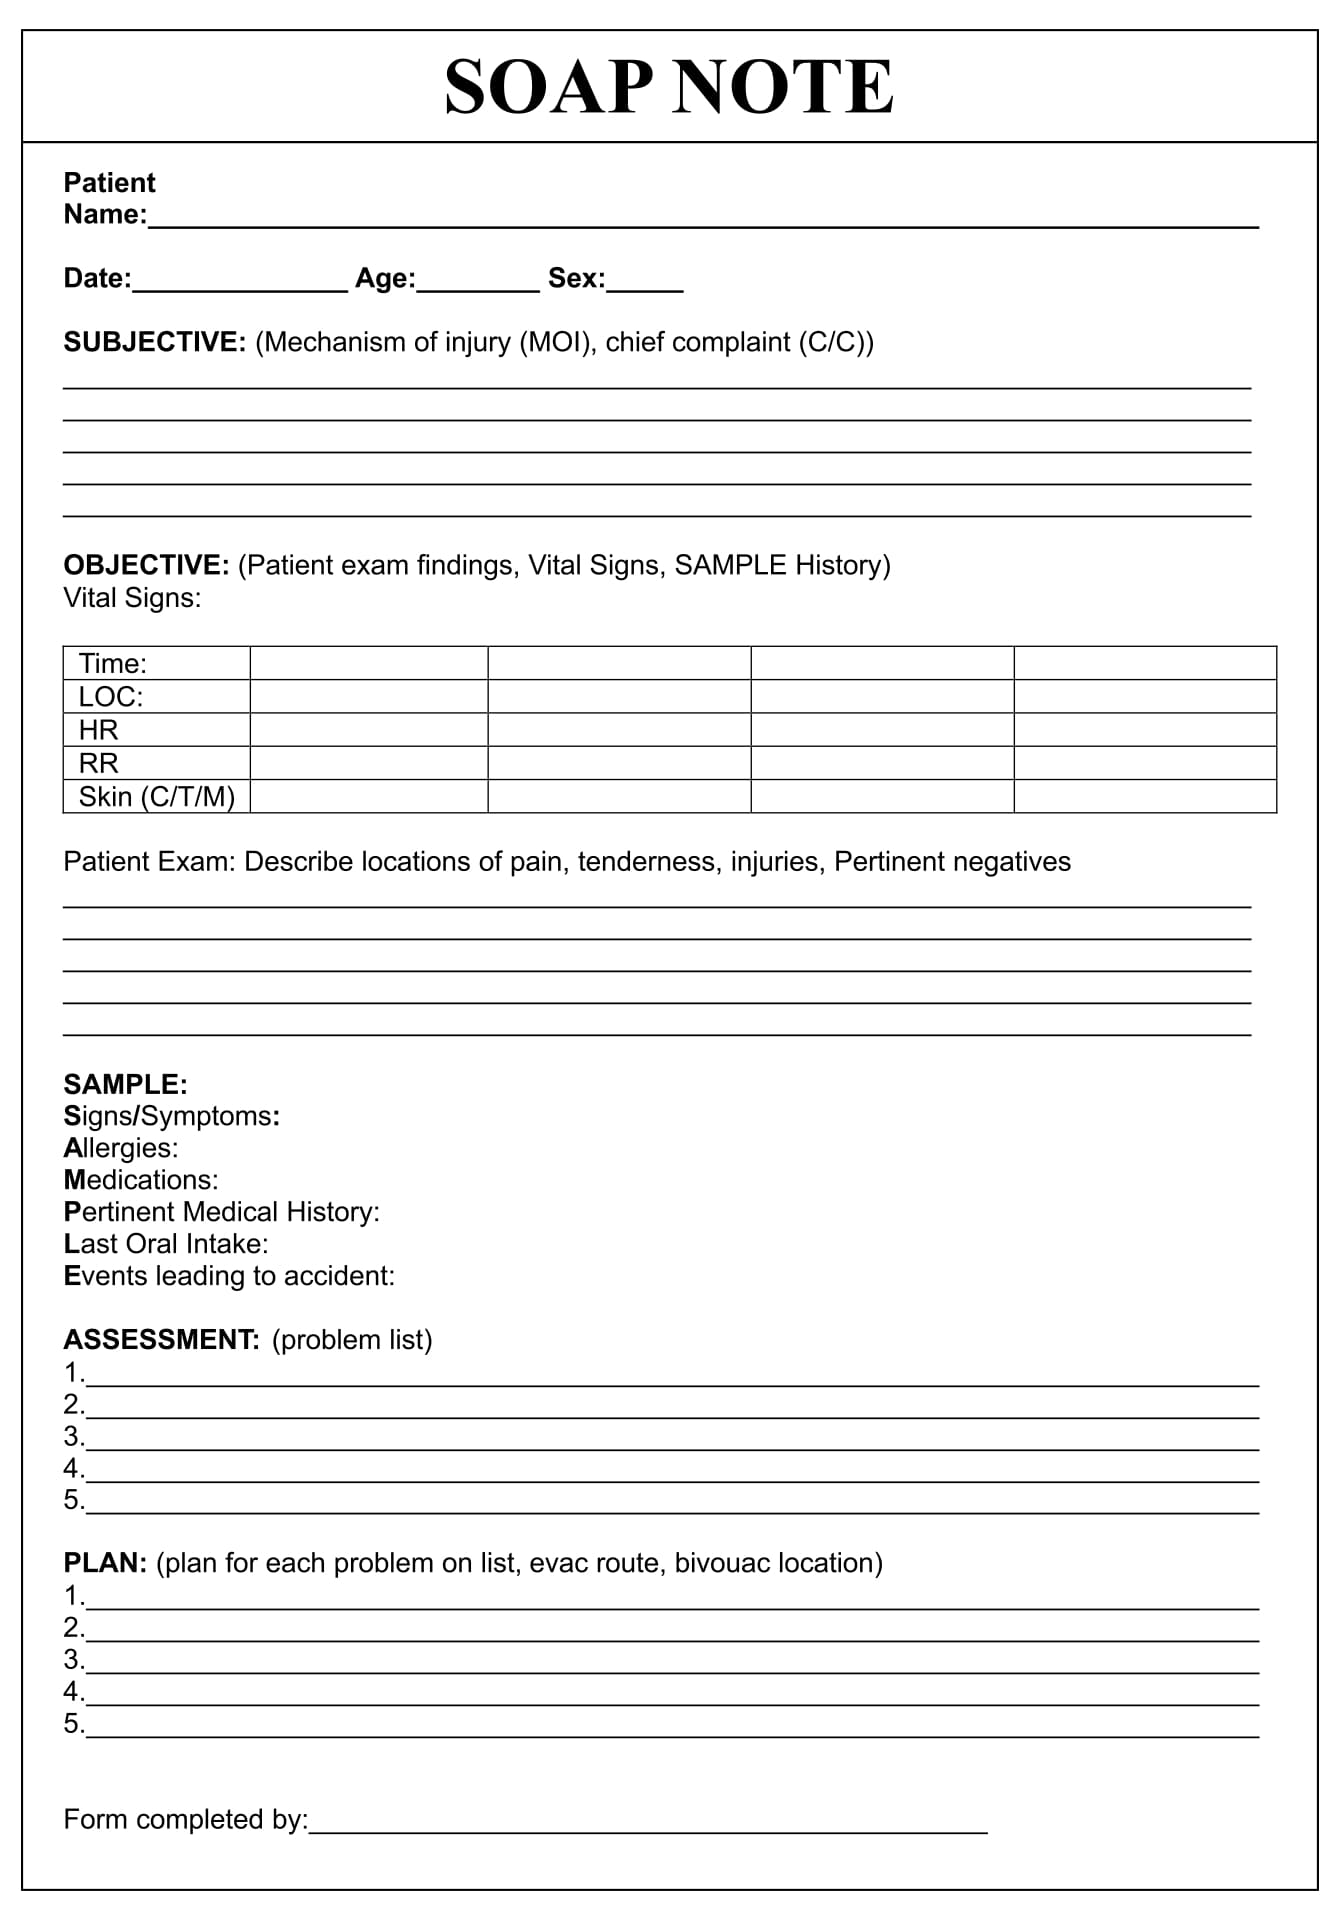 Printable Counseling SOAP Note Templates_93001 (1)